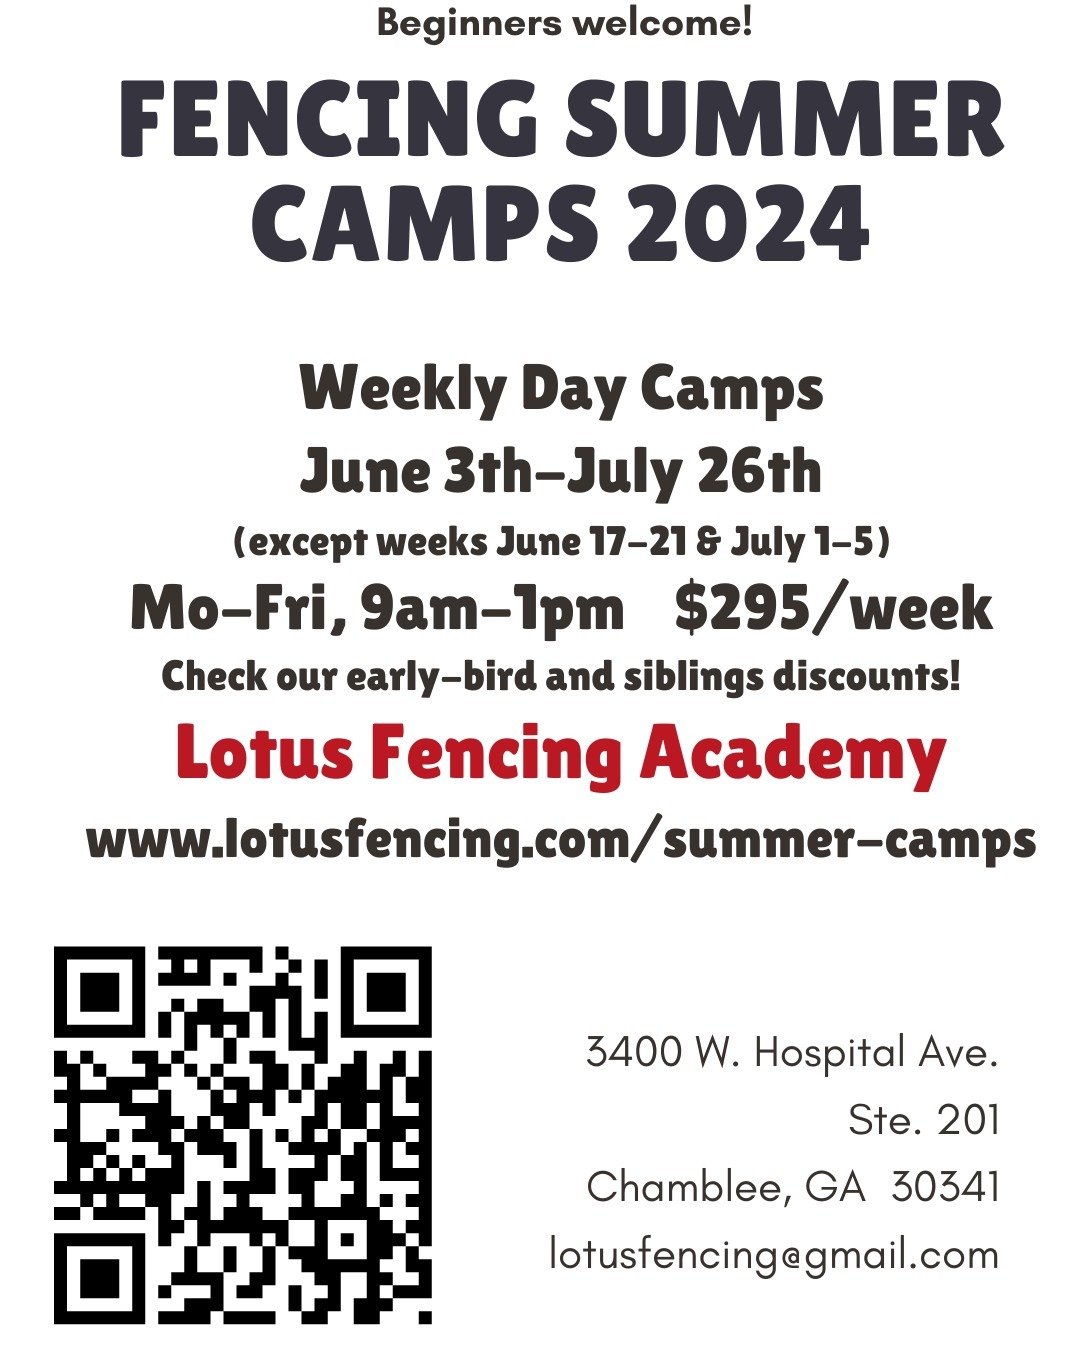 🔥FLASH SALE!! 🔥 Our day summer camps are on sale this weekend! $245/camp. BEGINNERS WELCOME! Sale only available May 10-12. Save your spot with a $100 deposit.